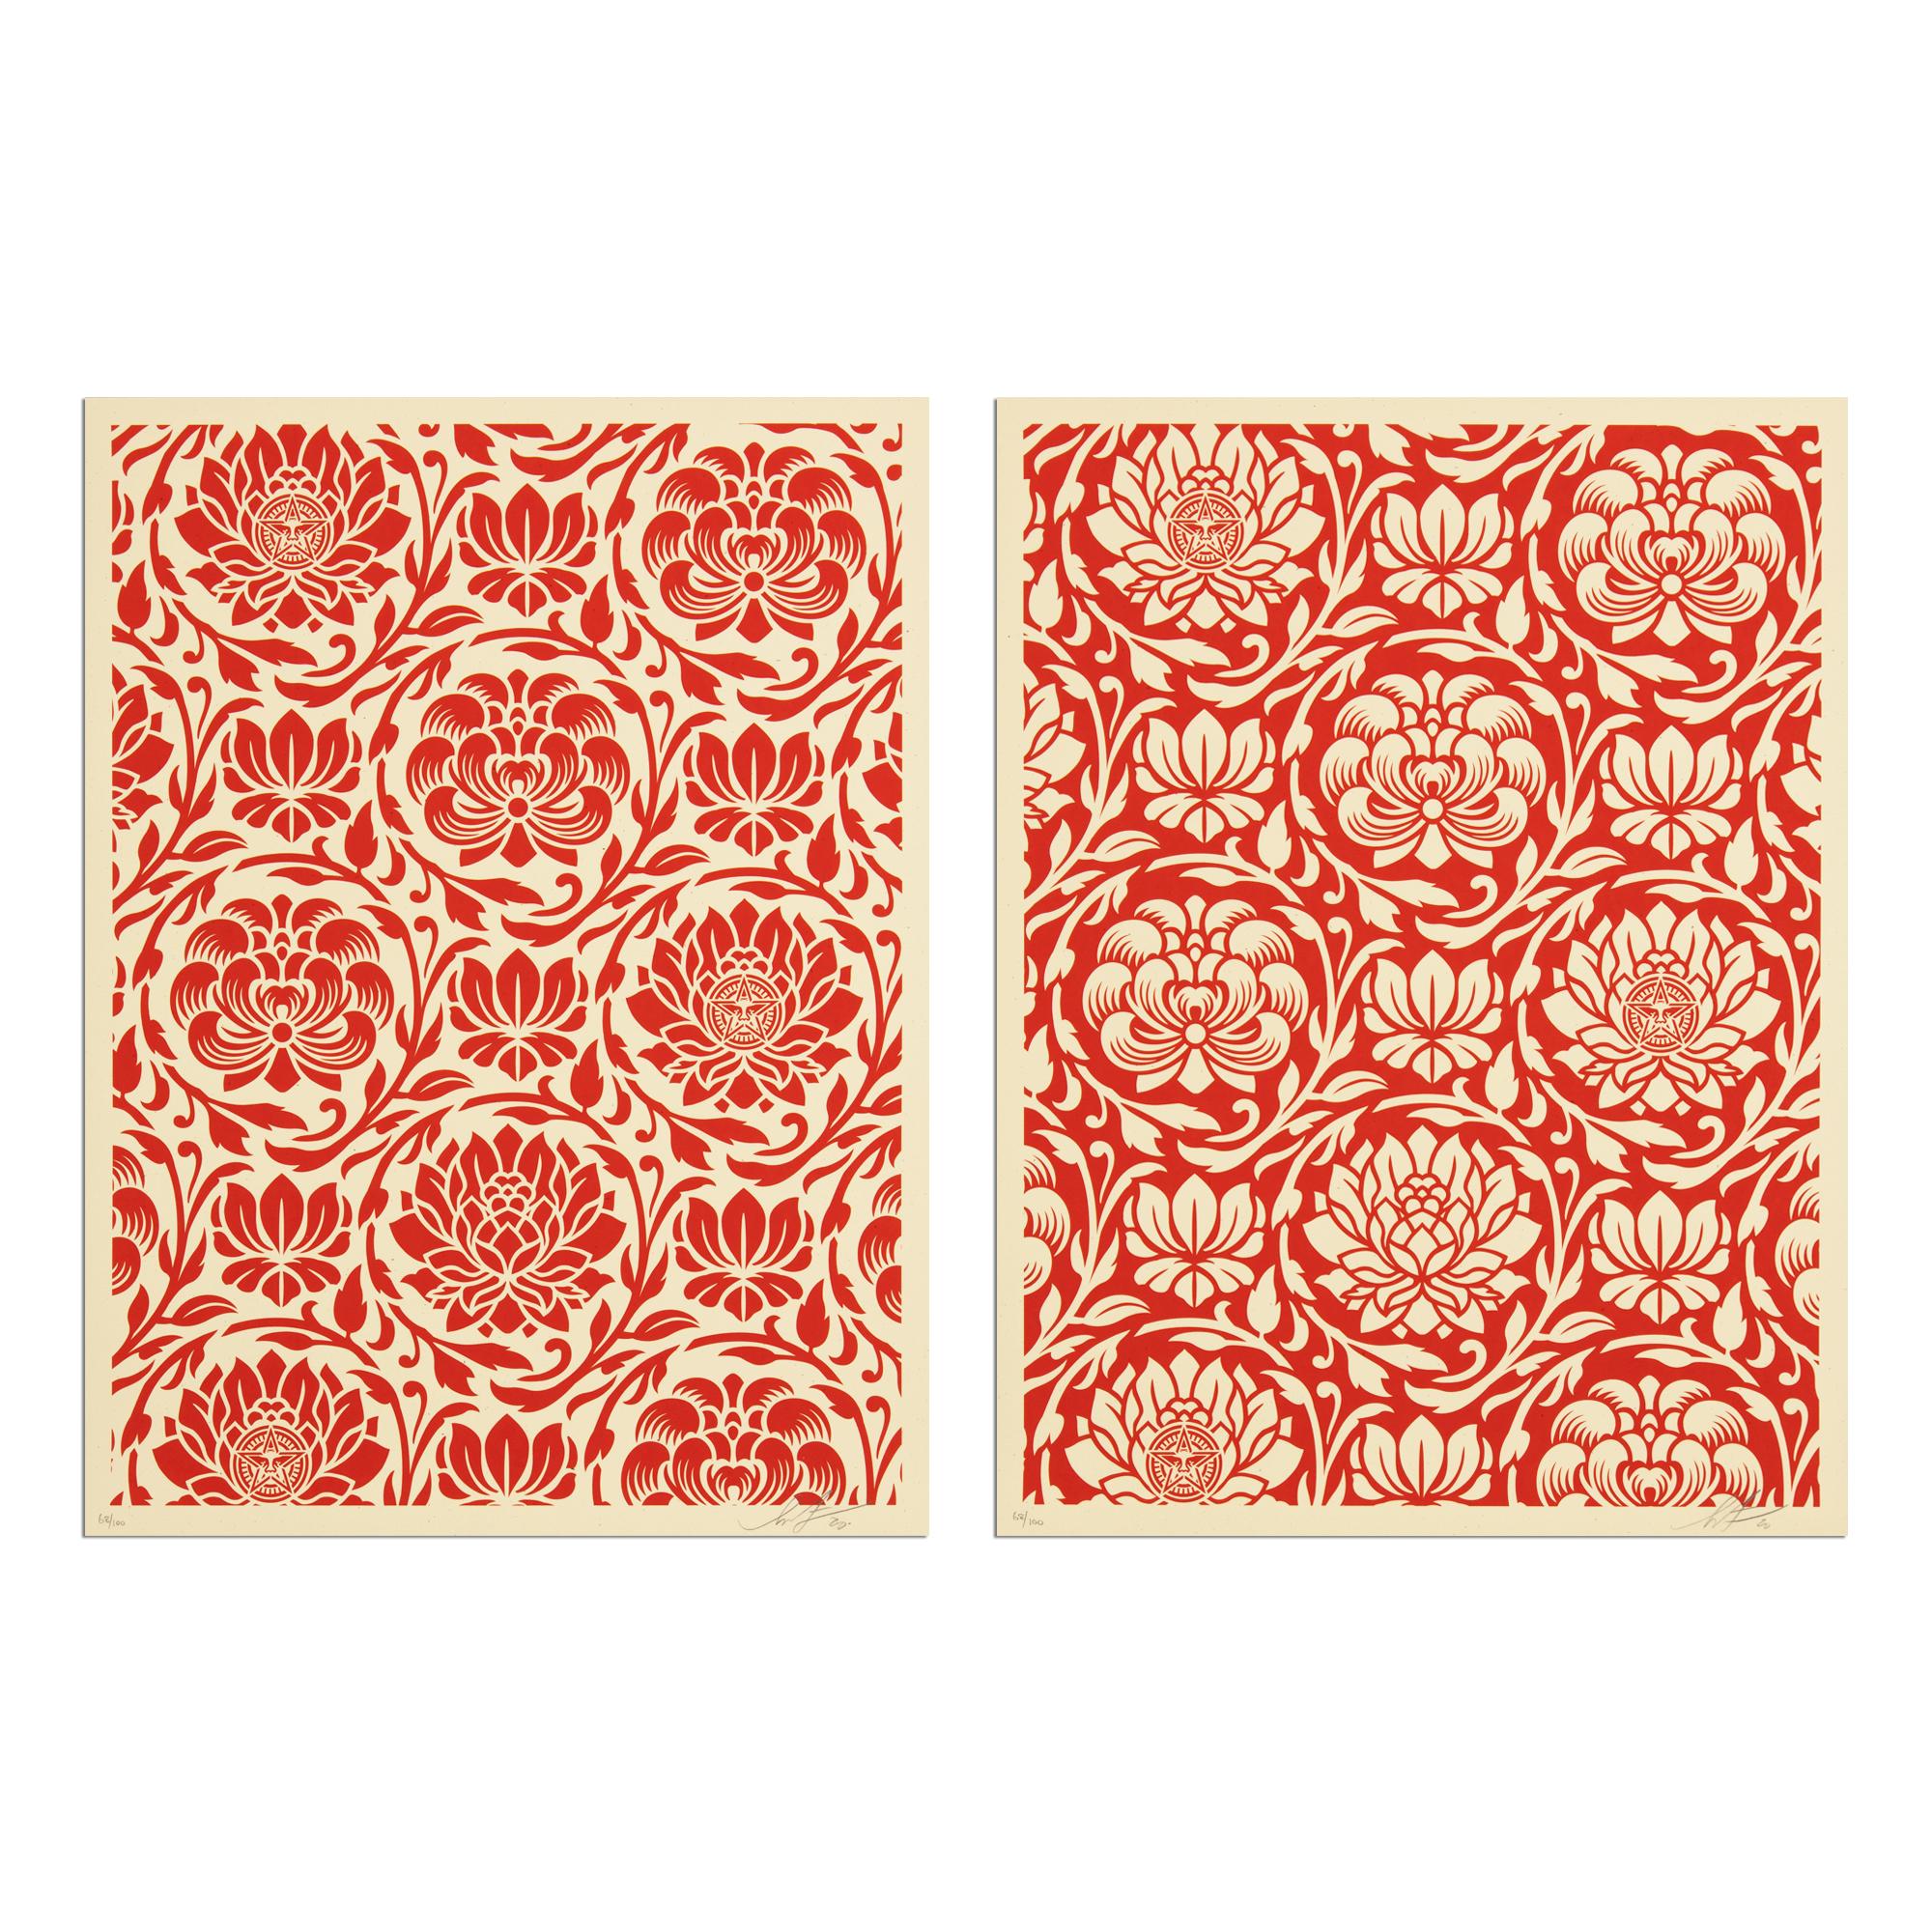 Shepard Fairey (American, b. 1970)
Floral Harmony (Red Yin/Yang), 2020
Medium: 2 screenprints on paper
Dimensions: each 24 x 18 in (61 x 46 cm)
Edition of 100: Each hand signed and numbered in pencil
Condition: Mint